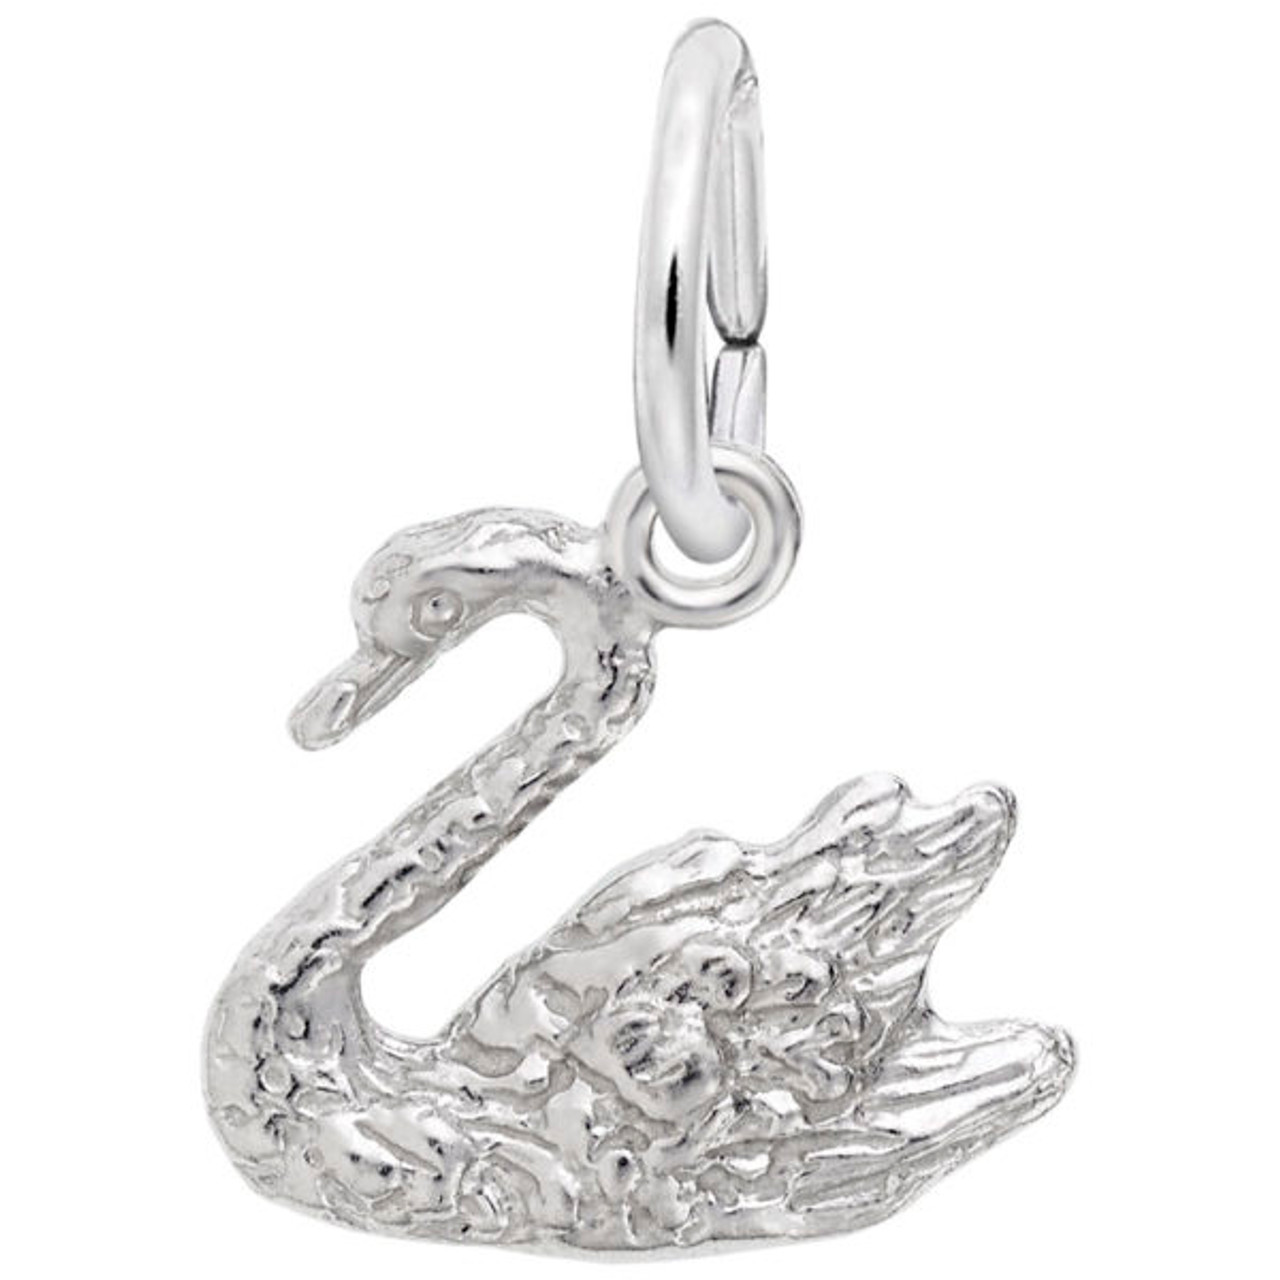 Swan Silver Charm - Sterling Silver and 14k White Gold